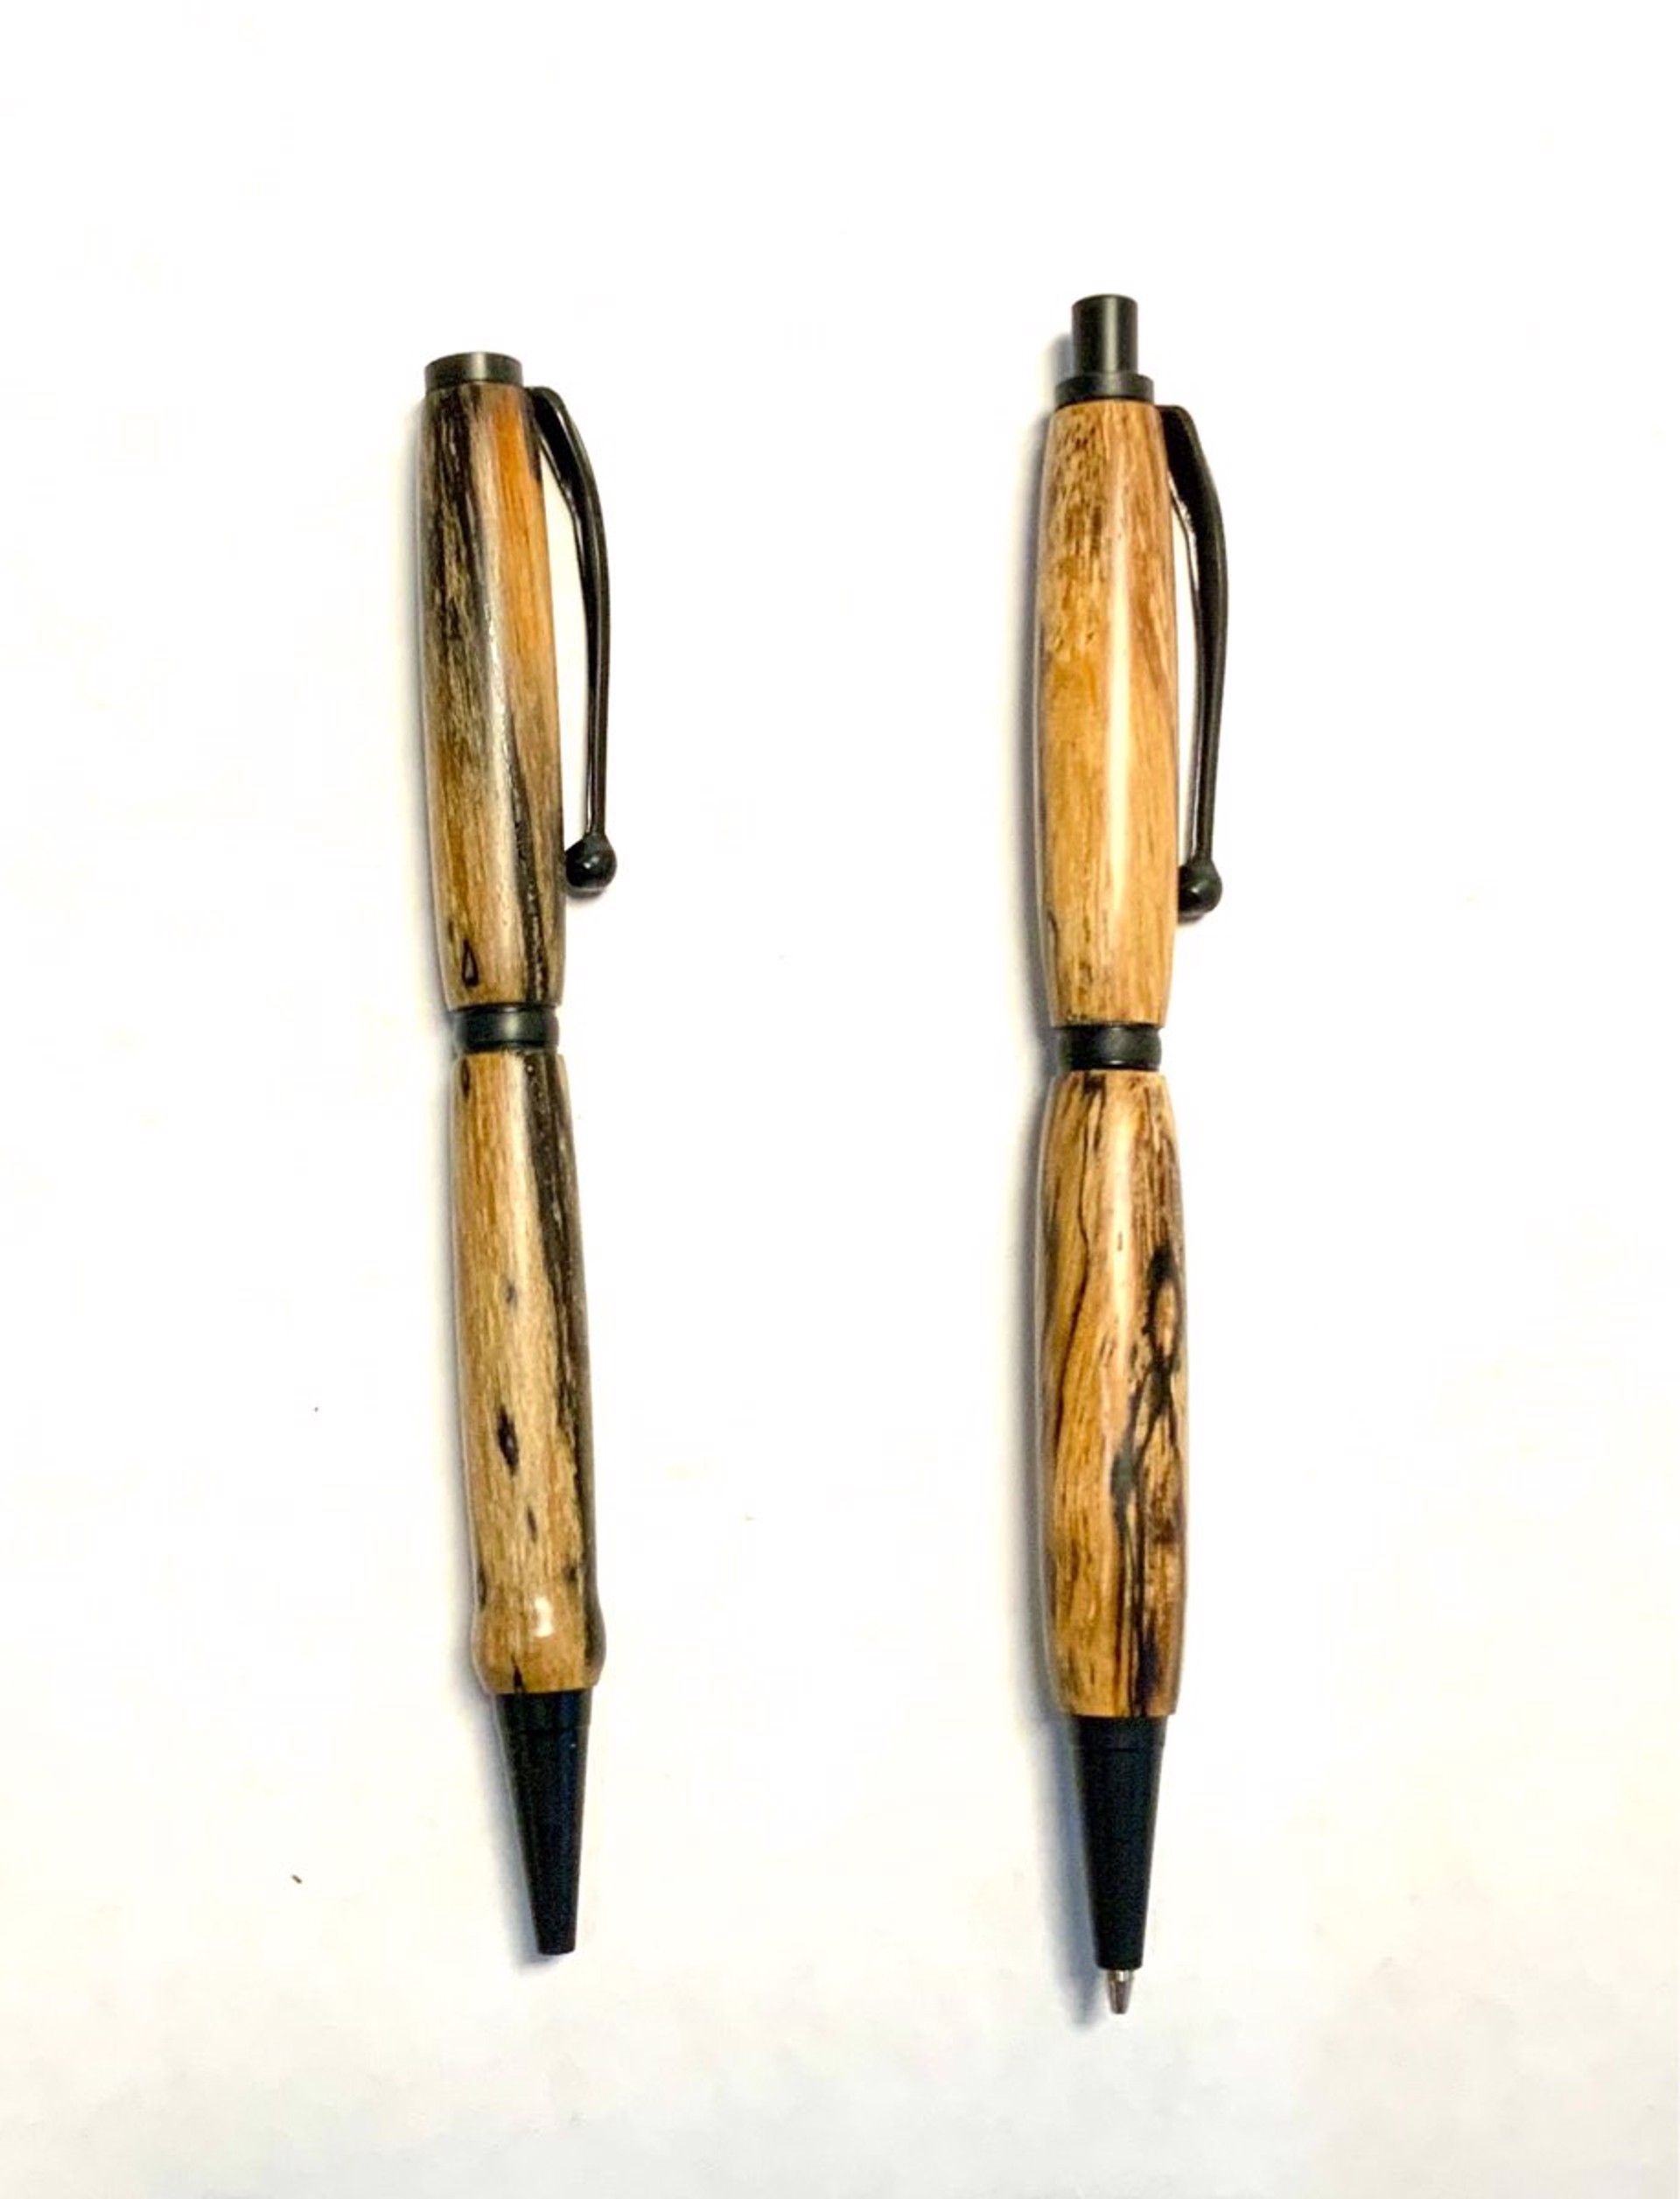 Spalted Maple Pen And Pencil Set by Tom Leazenby